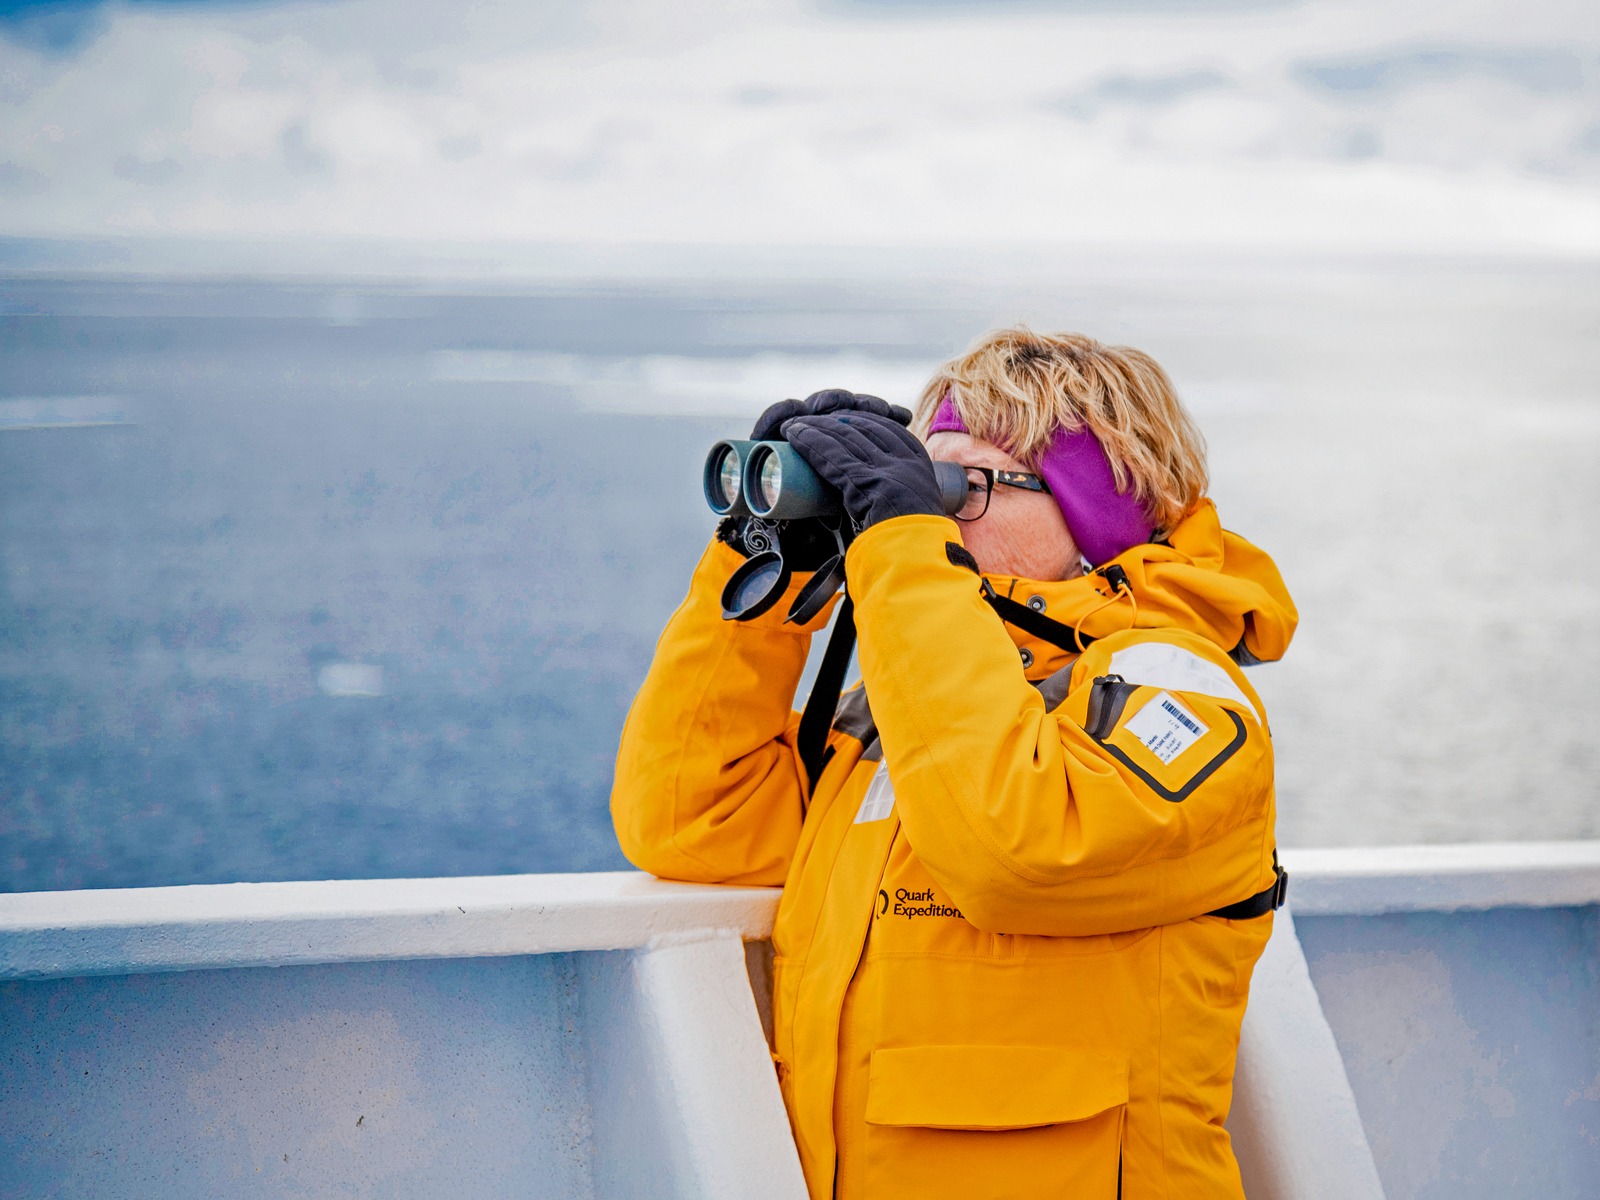 A woman using binoculars onboard Quark Expeditions' Ultramarine in the Arctic